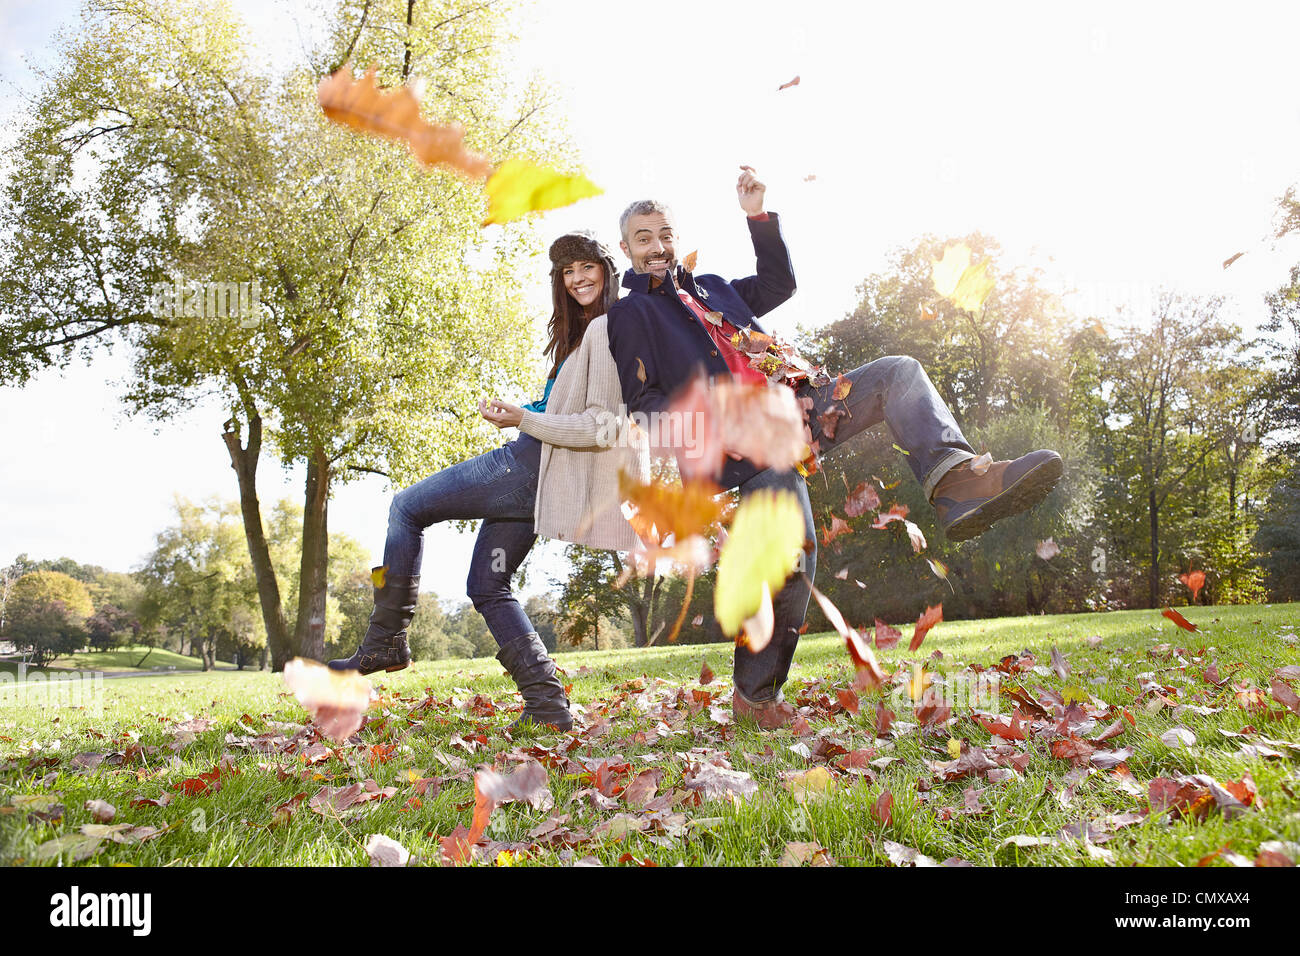 Germany, Cologne, Couple playing in park, smiling, portrait Stock Photo